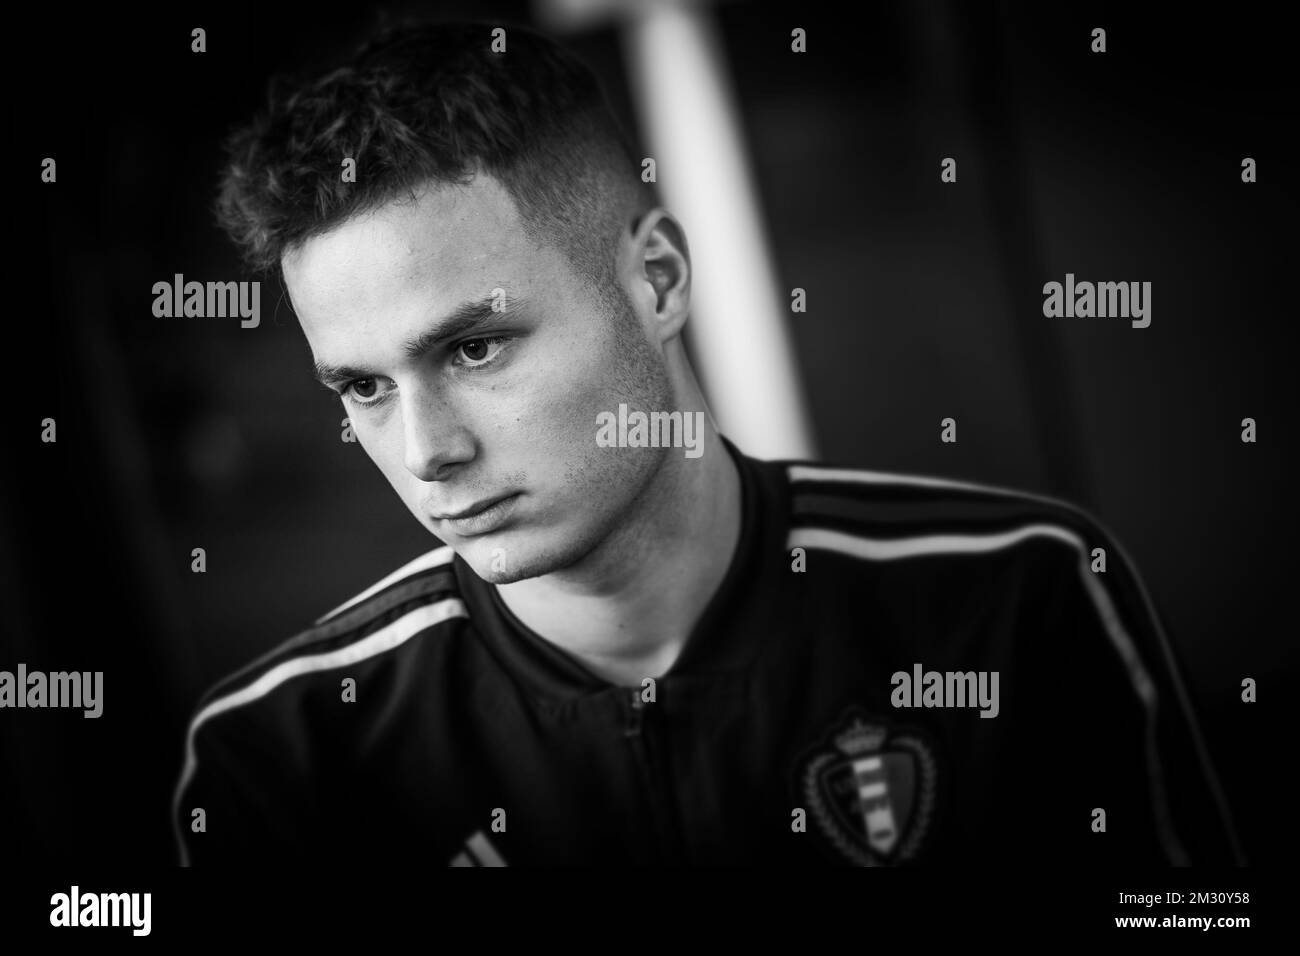 Belgium's Zinho Vanheusden pictured during a press conference of the U21 youth team of the Belgian national soccer team Red Devils, Tuesday 08 October 2019 in Tubize. BELGA PHOTO BRUNO FAHY Stock Photo